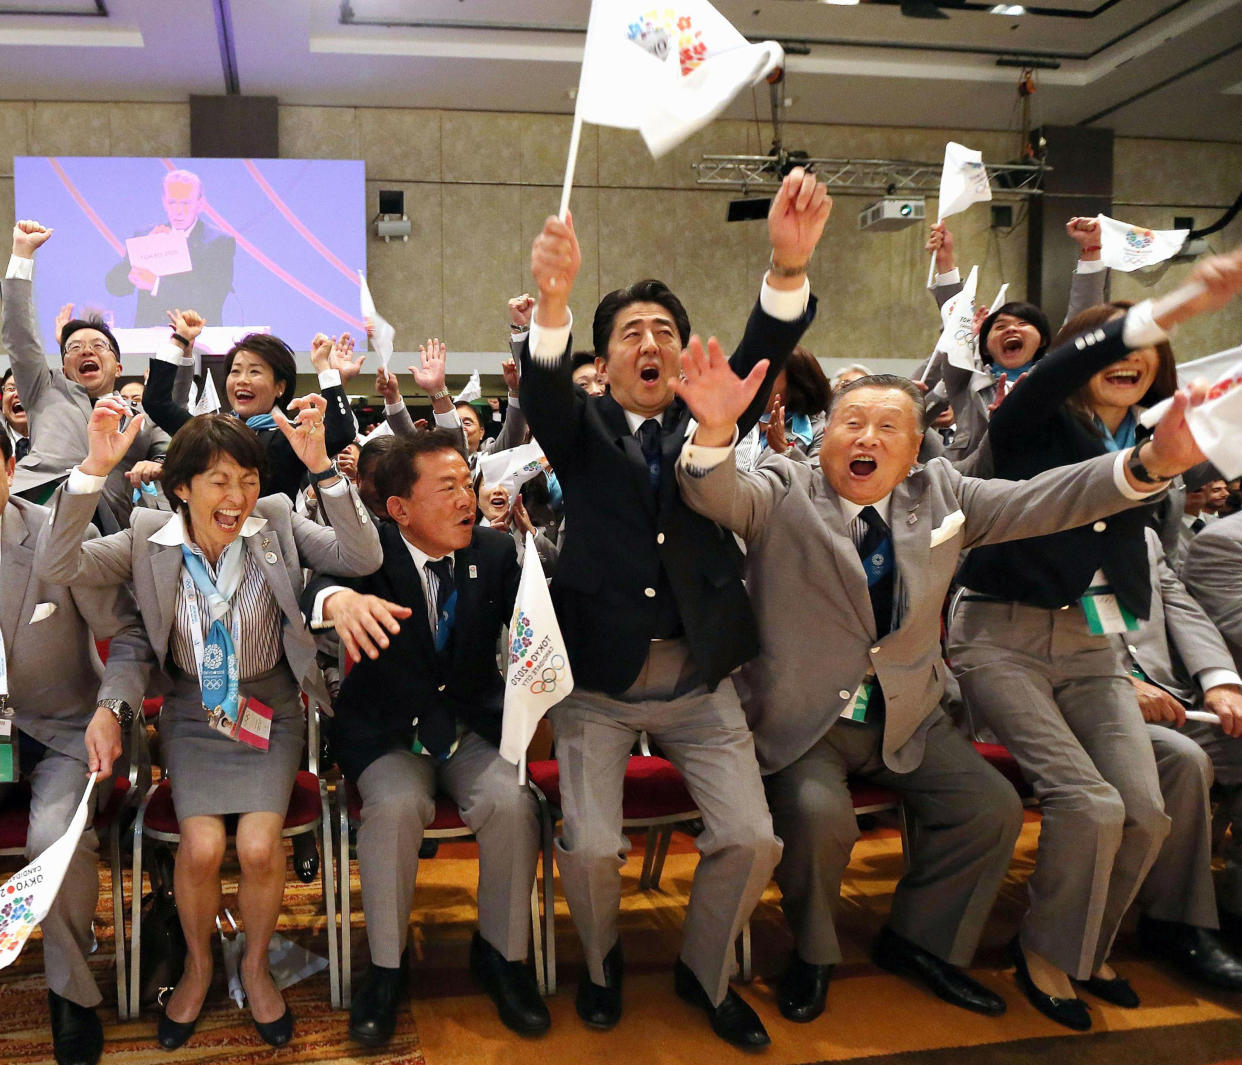 FILE - Japanese then Prime Minister Shinzo Abe, center, and former Prime Minister Yoshiro Mori, right, with other delegates, celebrate after Tokyo was awarded the 2020 Summer Olympic Games, in Buenos Aires, Argentine on Sept. 7, 2013. Former Prime Minister Shinzo Abe was the country’s central figure in landing the 2020 Olympics for Tokyo. Abe died after being shot while campaigning in western Japan on July 8, 2022. (Kyodo News via AP, File)